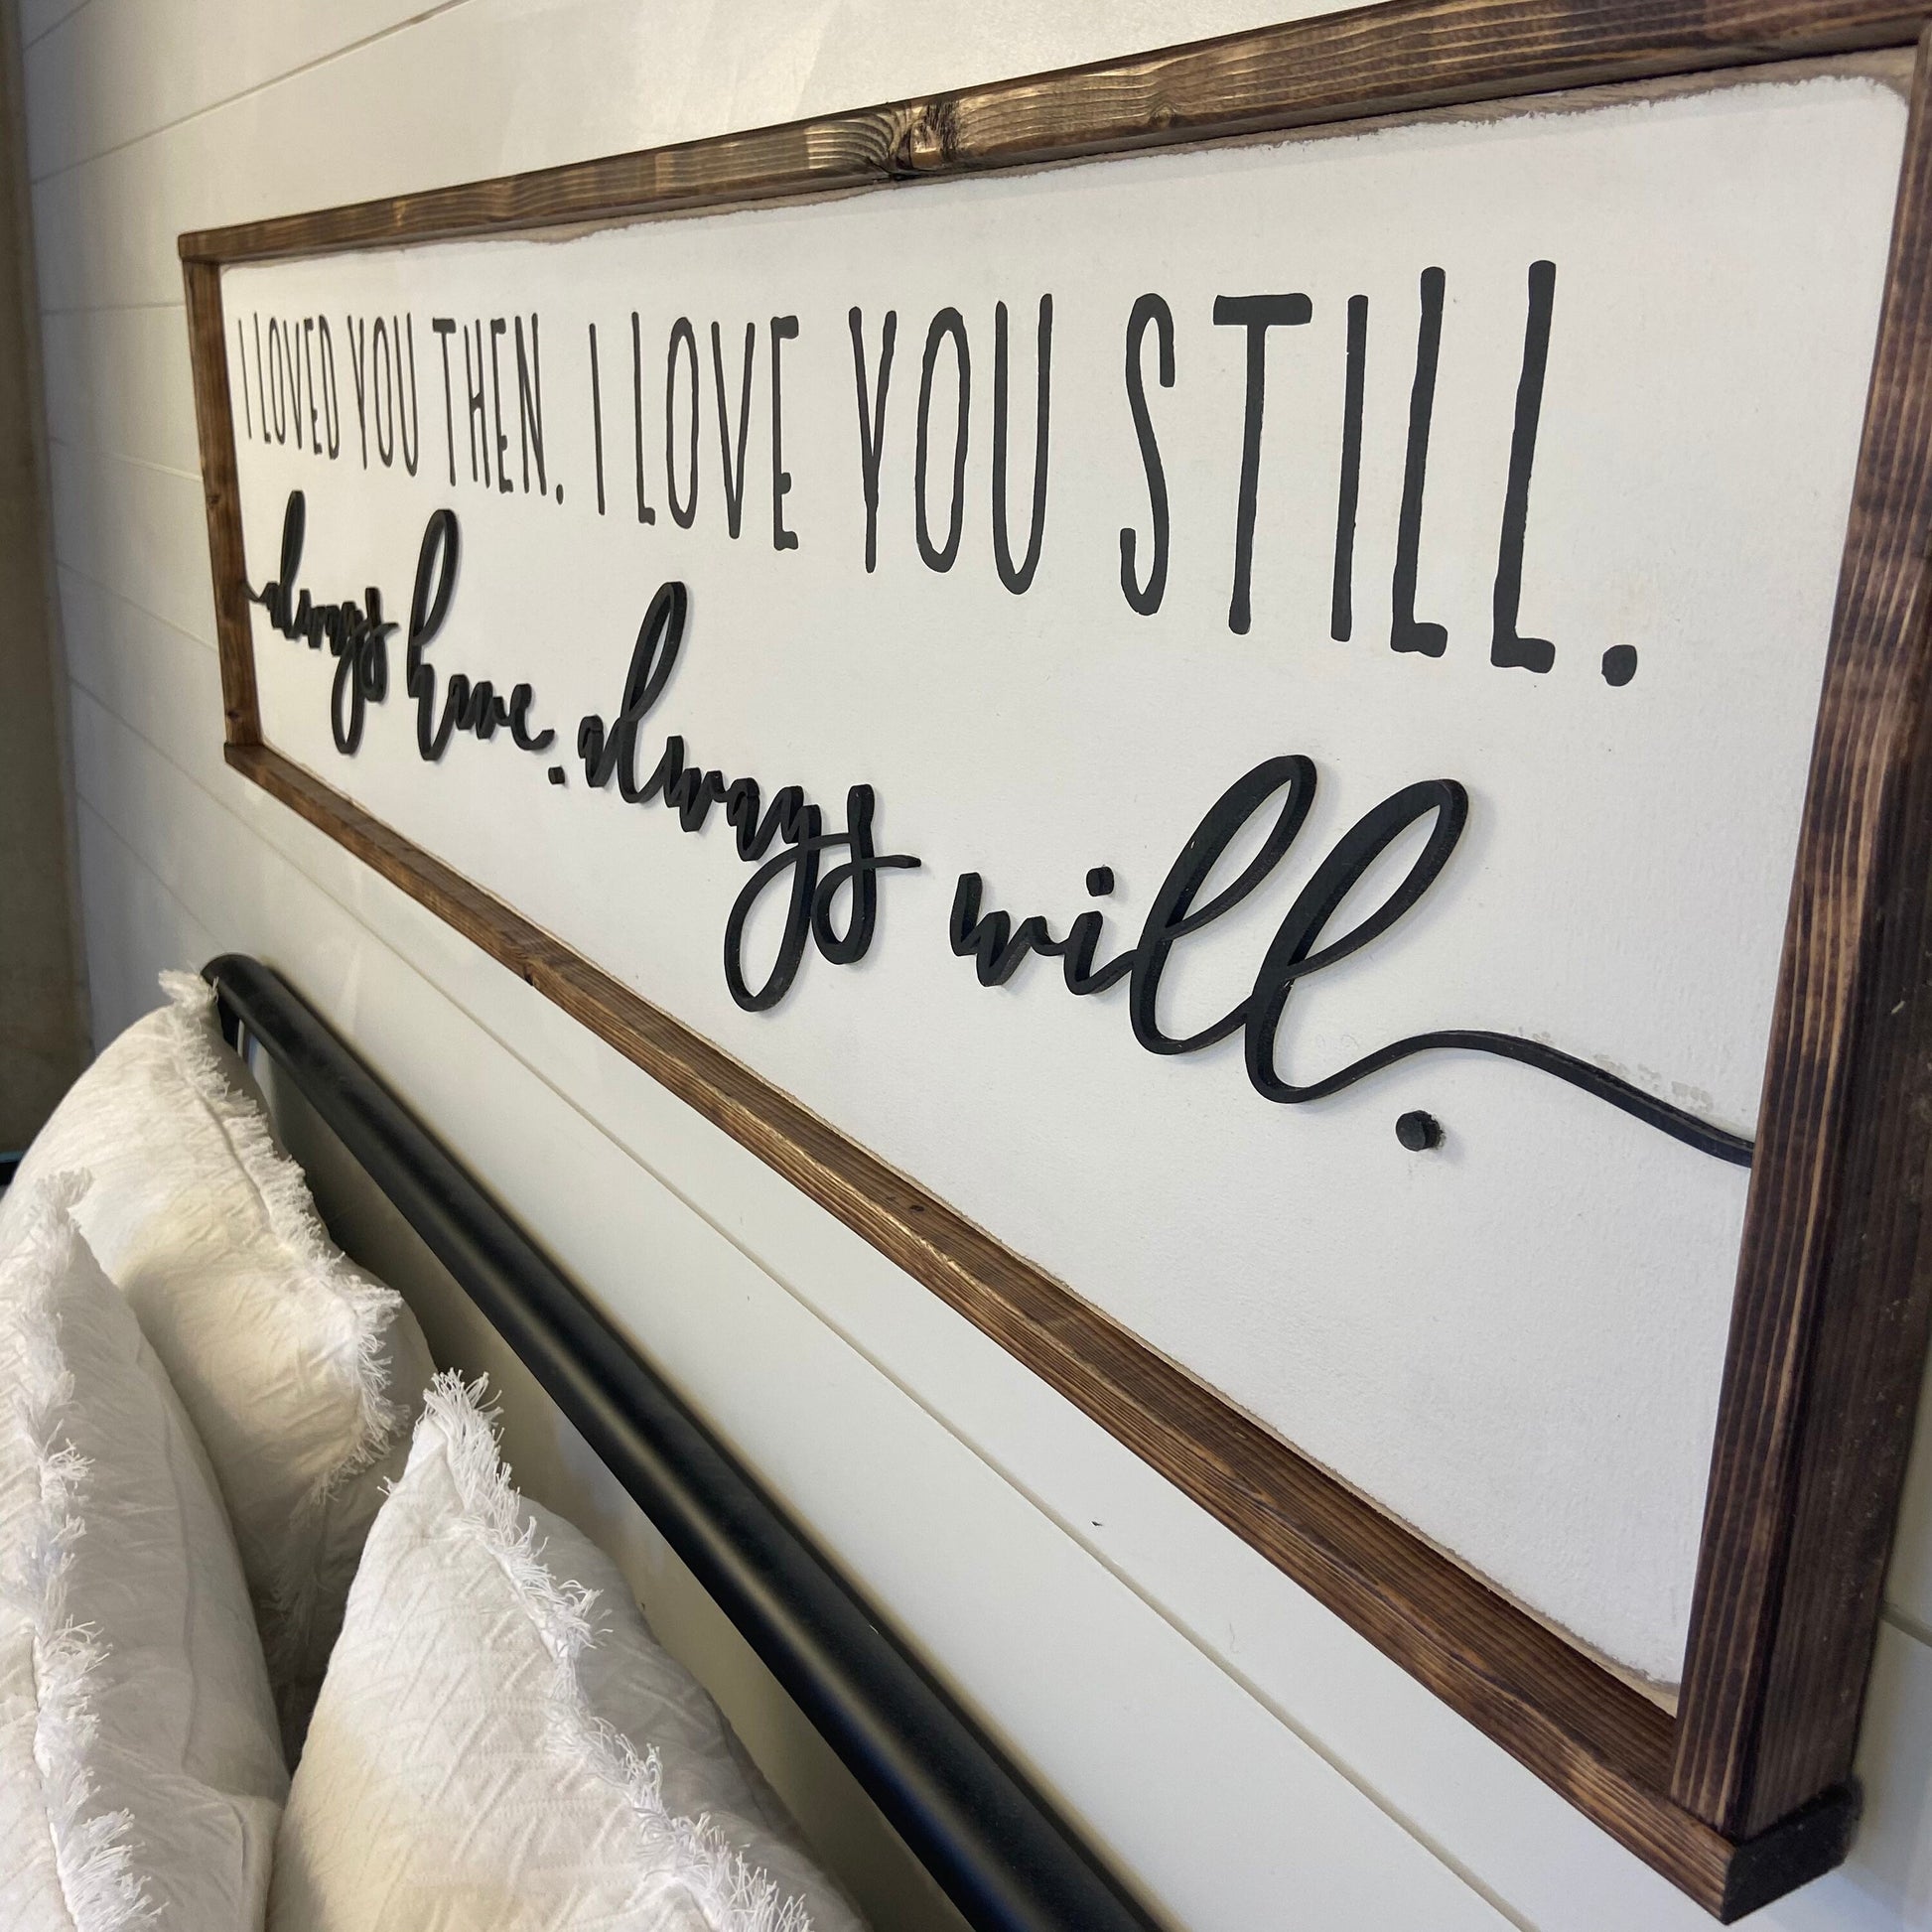 always have, always will, above over the bed sign, master bedroom wall art, king size, oversized [FREE SHIPPING!]